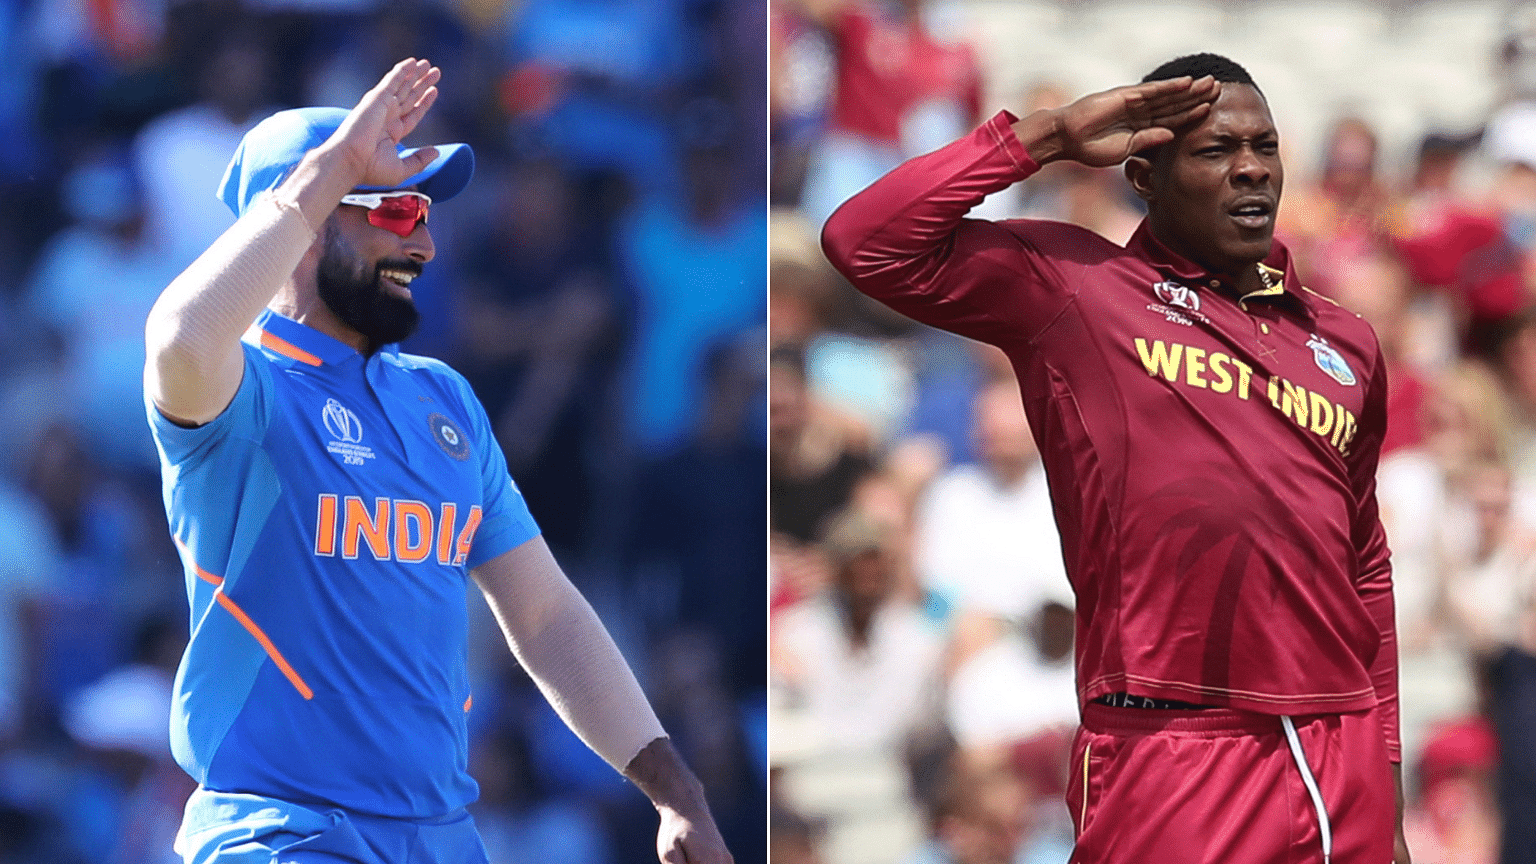 Sheldon Cottrell had a witty response to his Indian counterpart Mohammed Shami for copying the West Indies pacer’s salute celebrations.